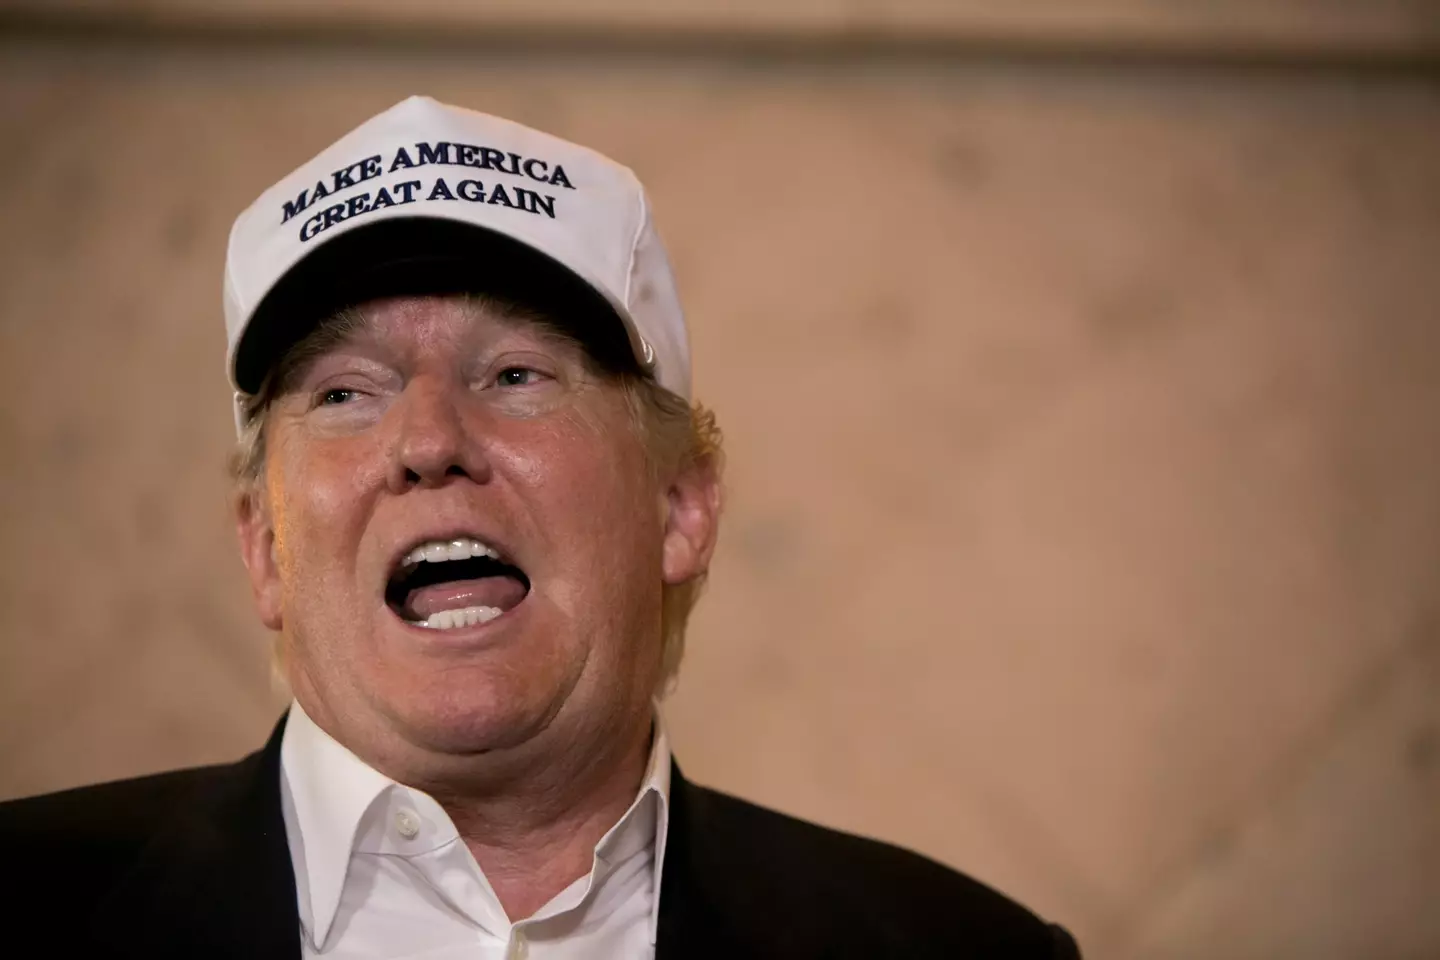 Donald Trump has suggested he intends to run for president again in 2024.